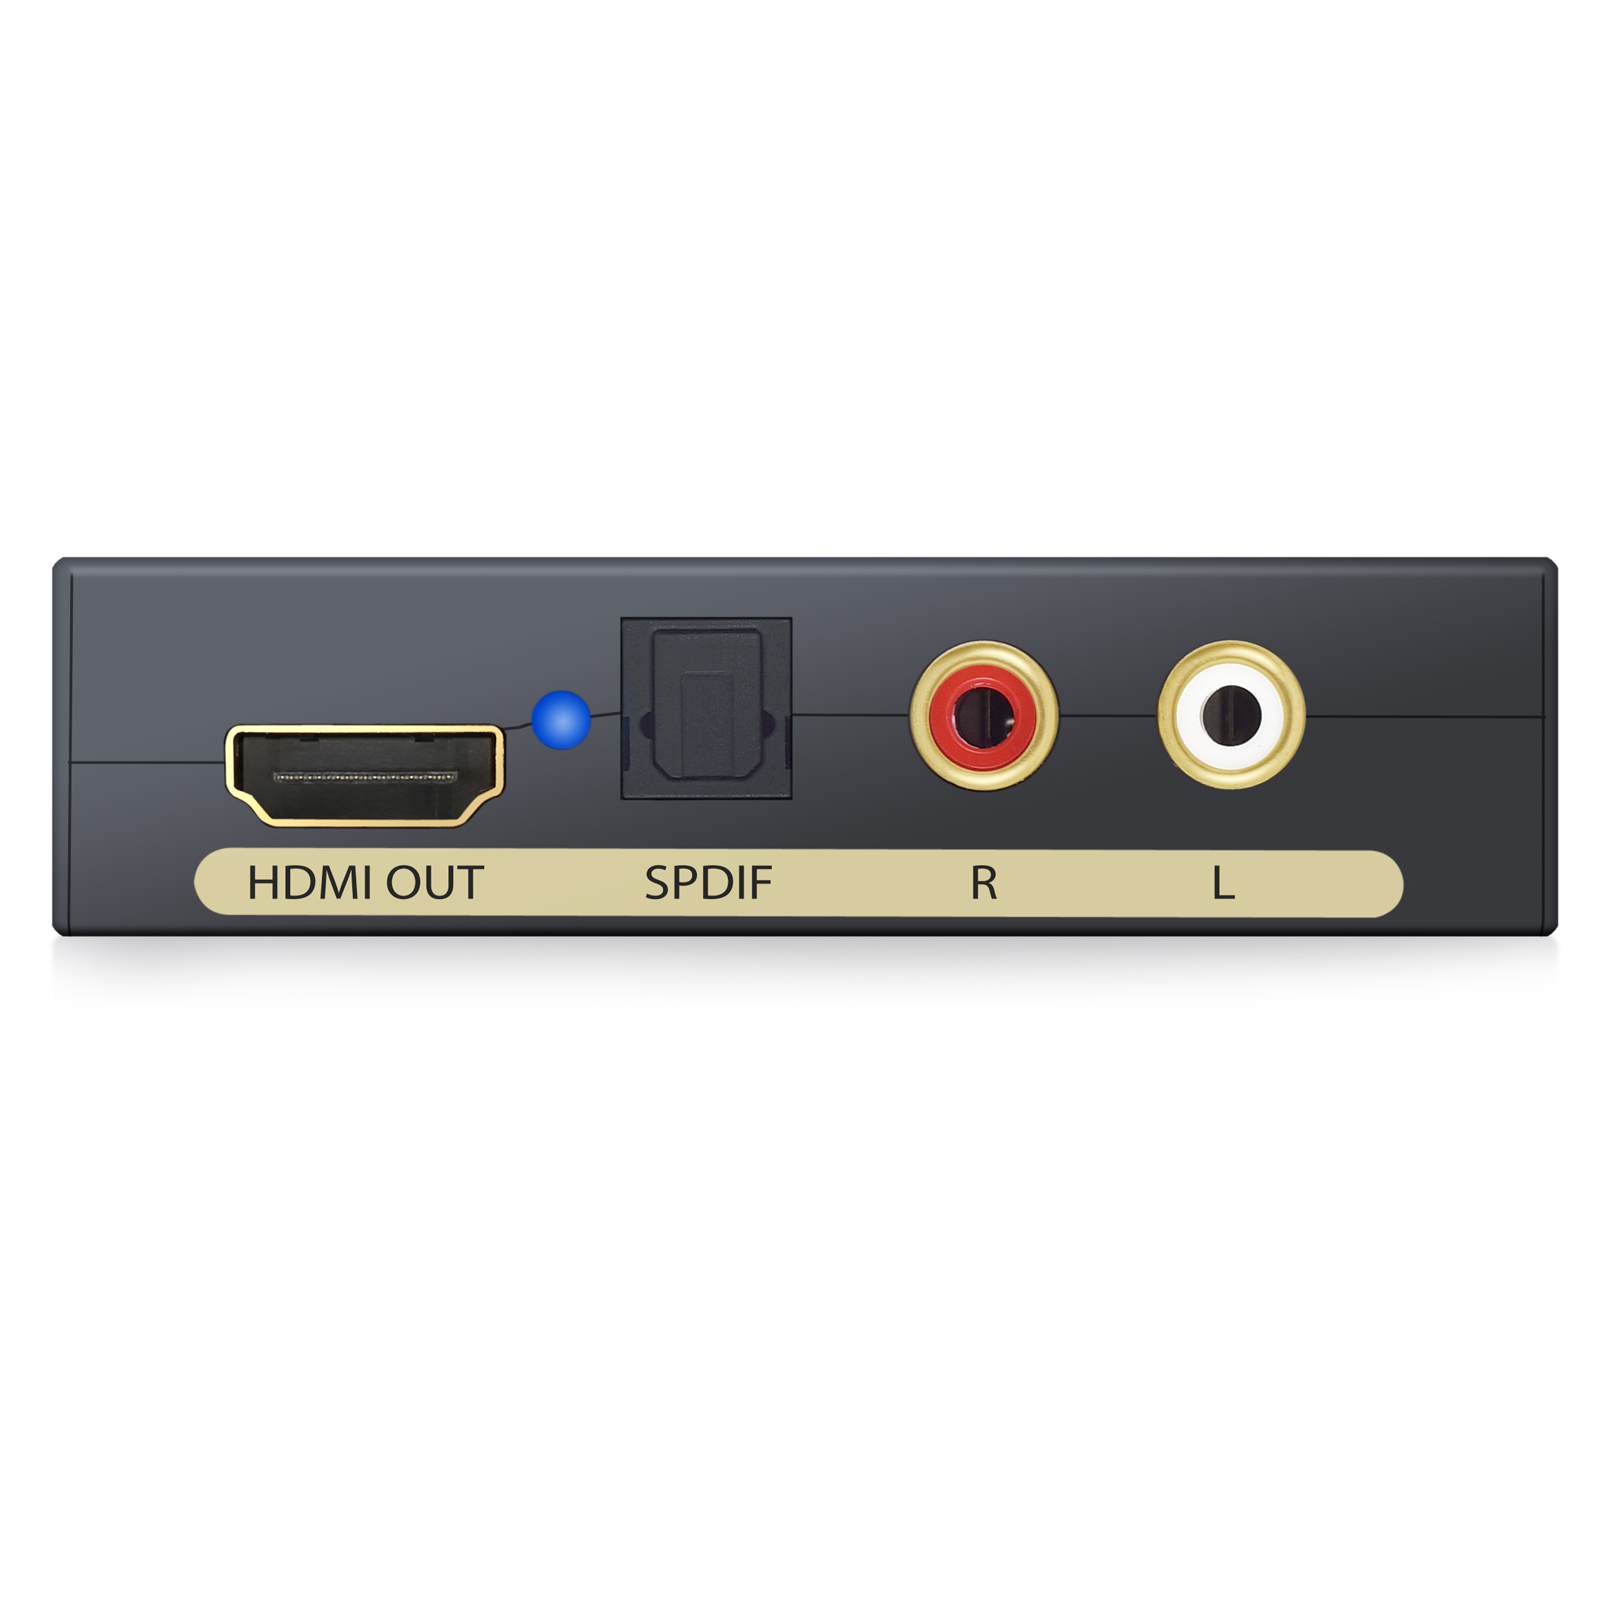 hdmi from mac to tv not working